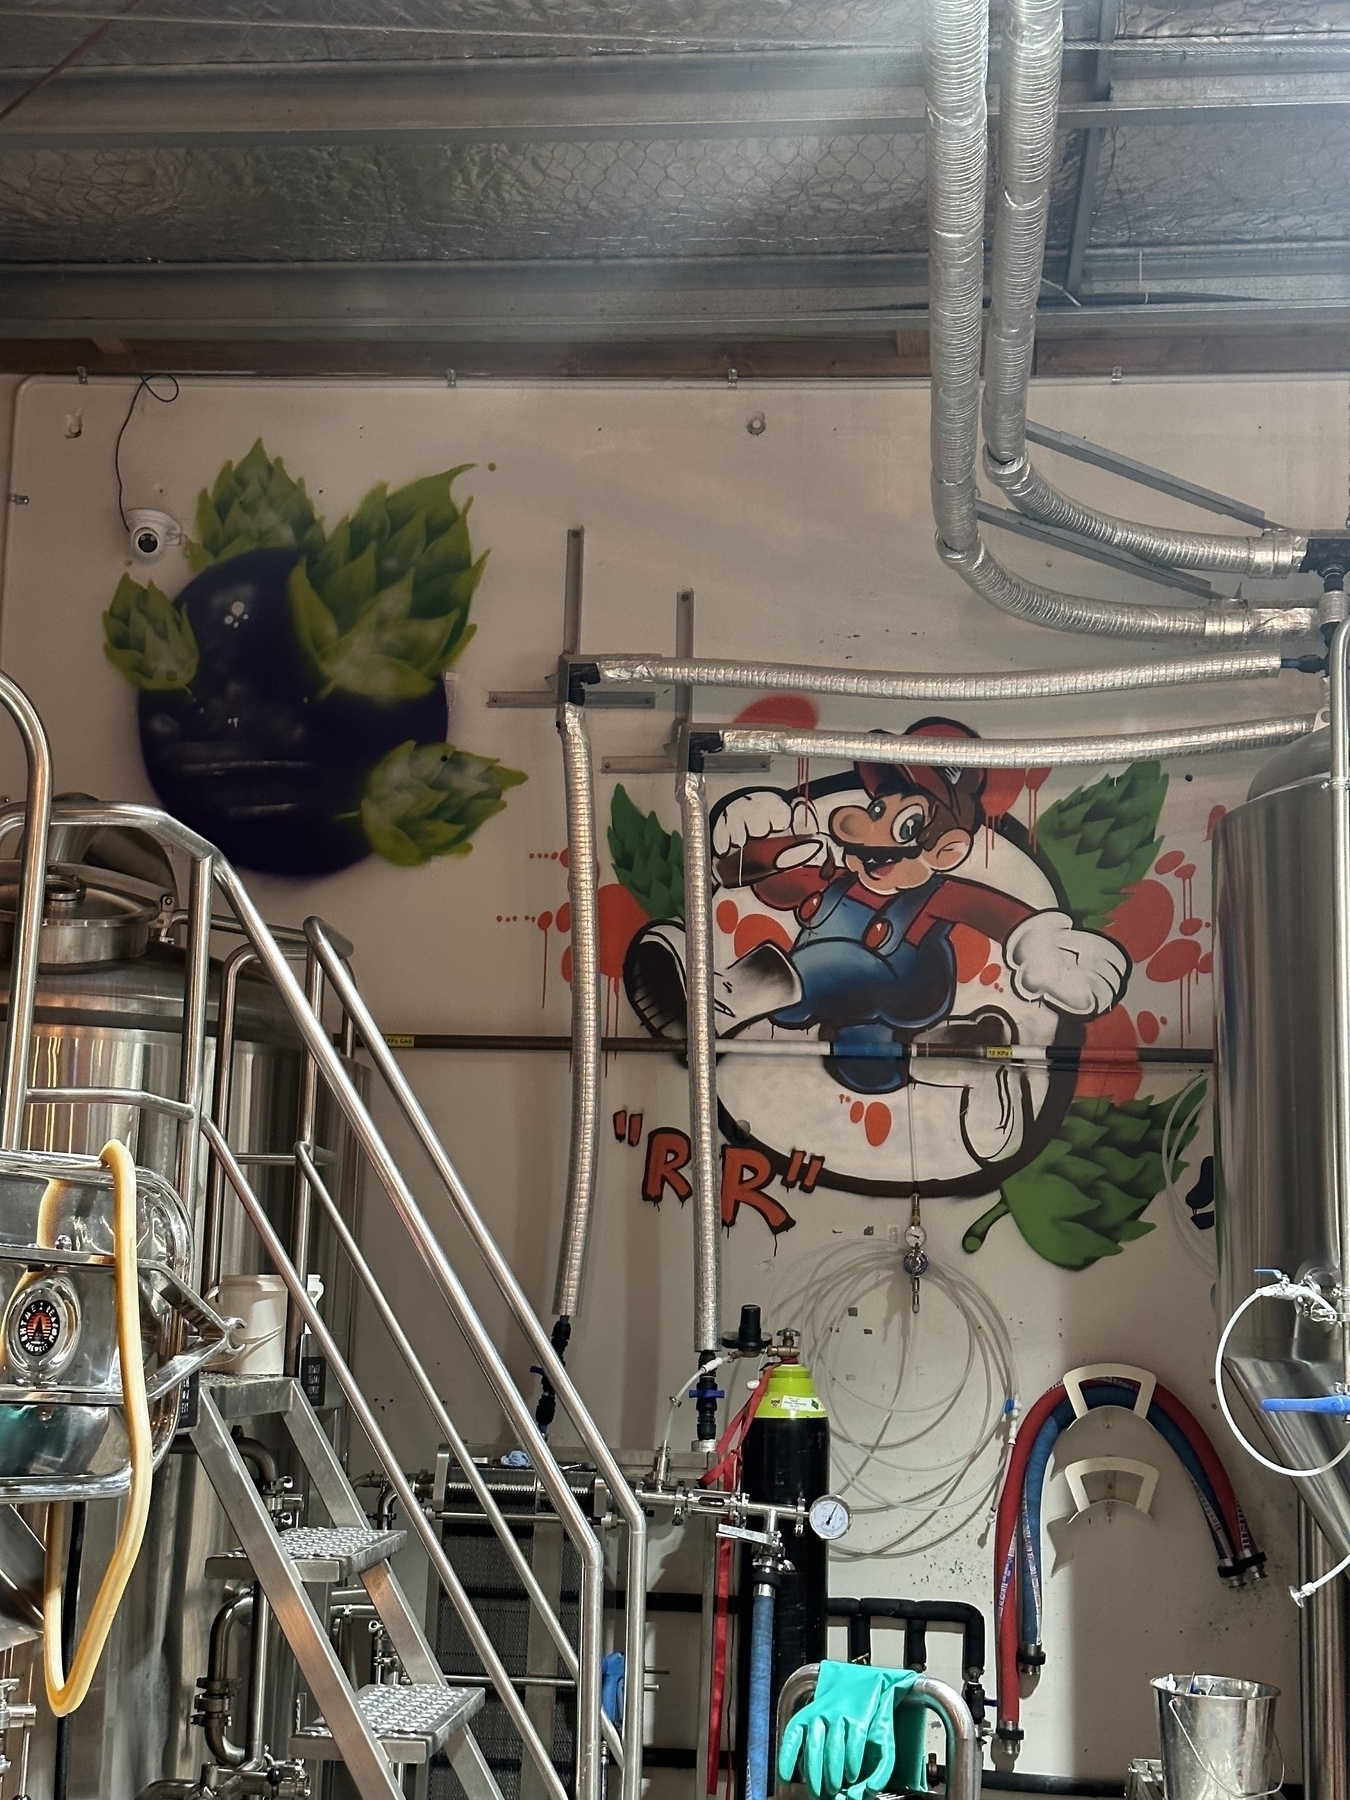 Two wall murals behind brewery vats. The left, a black planet orbited by giant hops. The right, Mario bursting through the wall, surrounded by hops, with the letters RxR in the bottom-left.